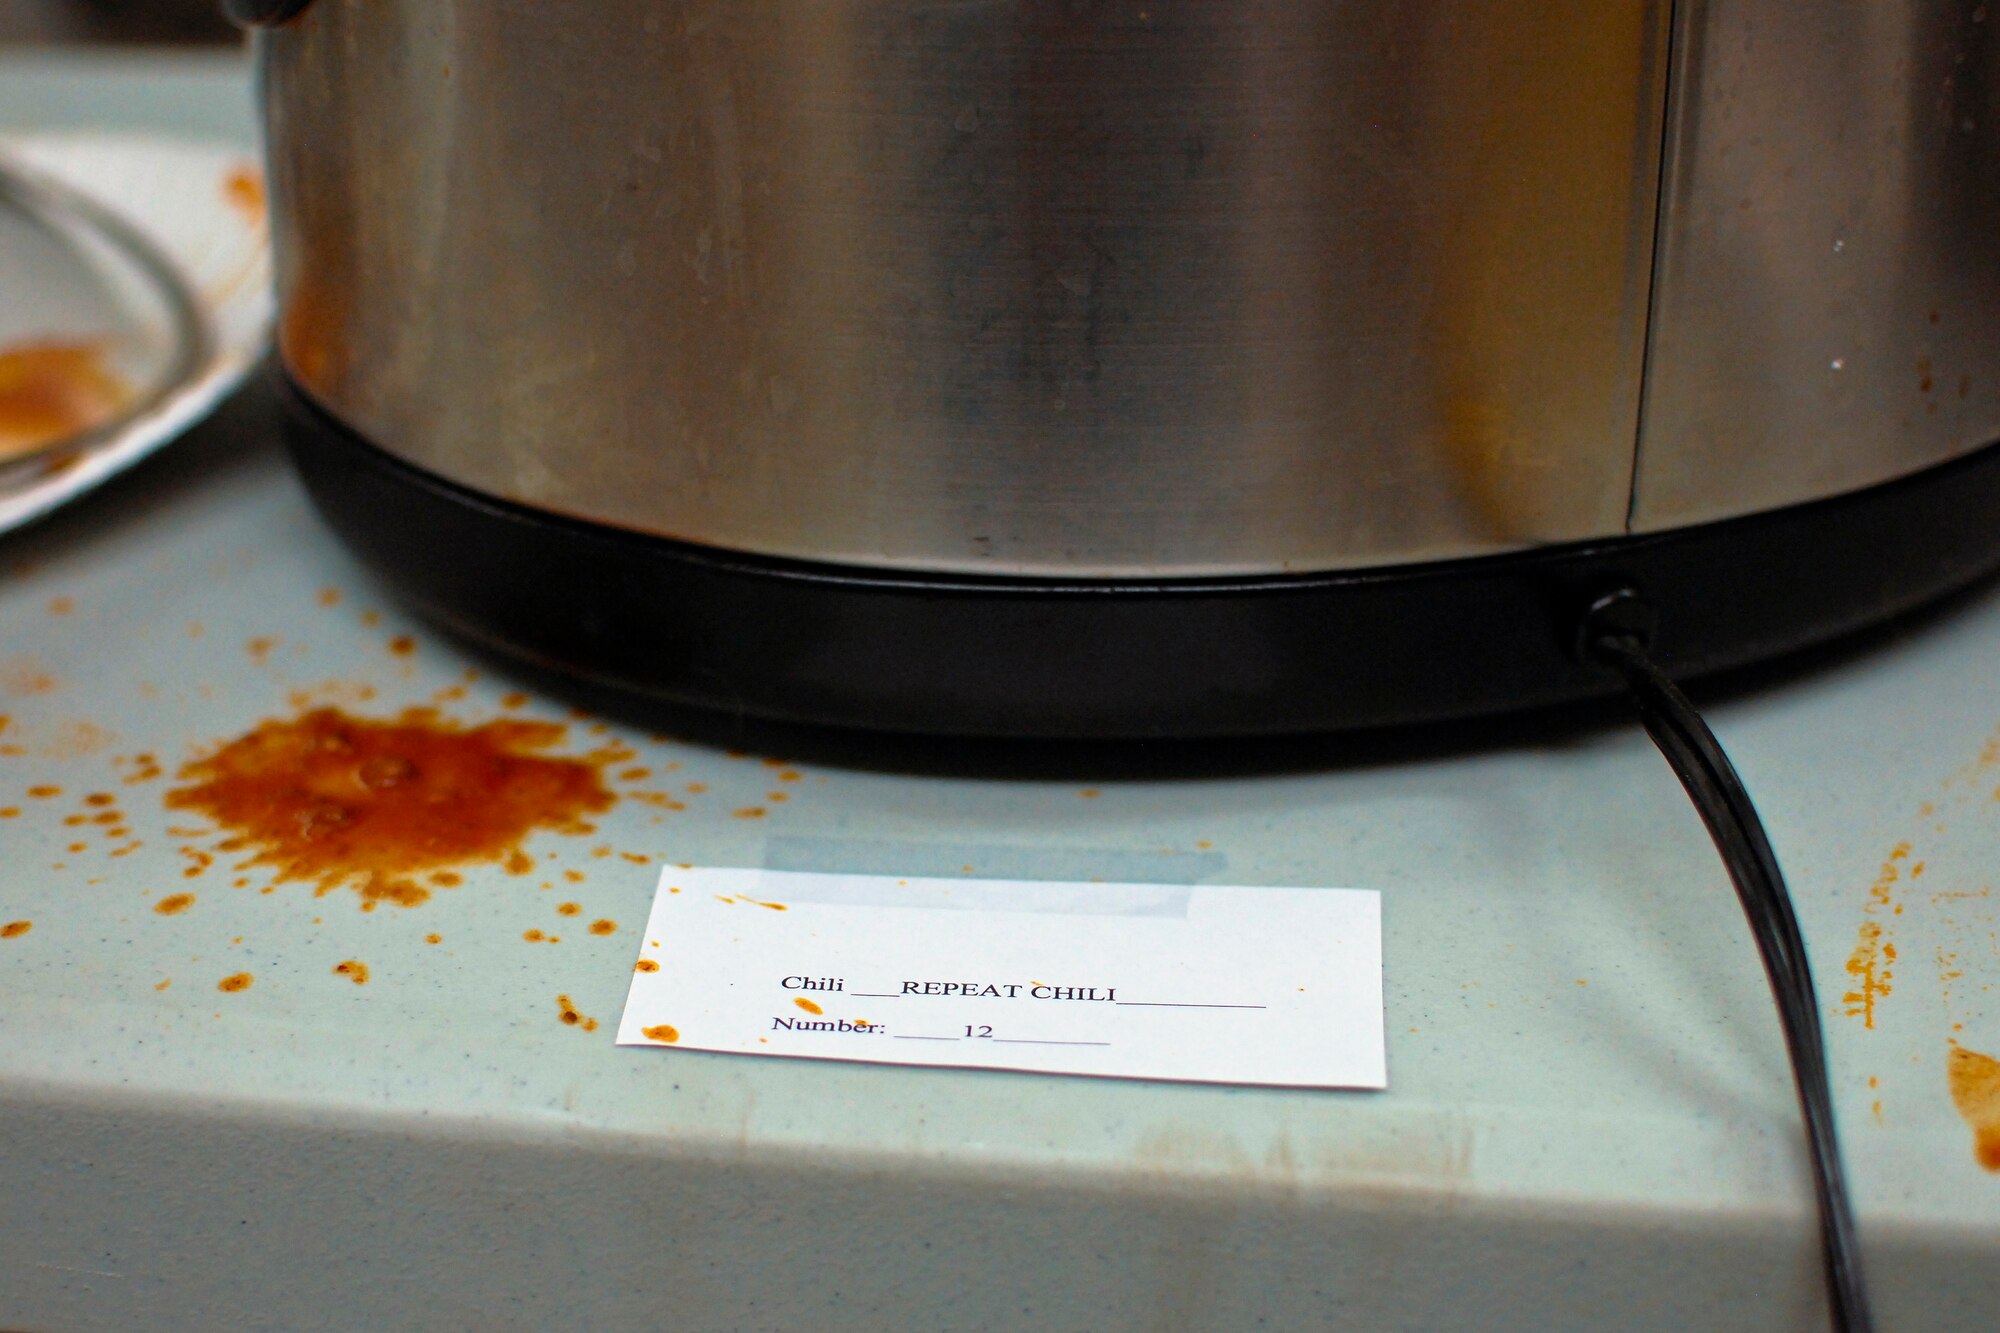 The aftermath of U.S. Air Force Master Sgt. Ian Berhringer’s Repeat Chili is seen after the sixth-annual chili cook off at the 182nd Airlift Wing, Peoria, Ill., Jan. 8, 2014. The competition placed 13 contestants and their homemade chili recipes against each other to compete for best look and smell, best consistency, and best taste. Behringer, a guidance and control shop chief with the Maintenance Squadron, won in the best taste category and the people’s choice award for his recipe. The event brought out approximately 120 unit members to sample the various white and traditional red entries, and raised $490 in support of operating the wing’s consolidated club. (U.S. Air National Guard photo by Staff Sgt. Lealan Buehrer/Released)